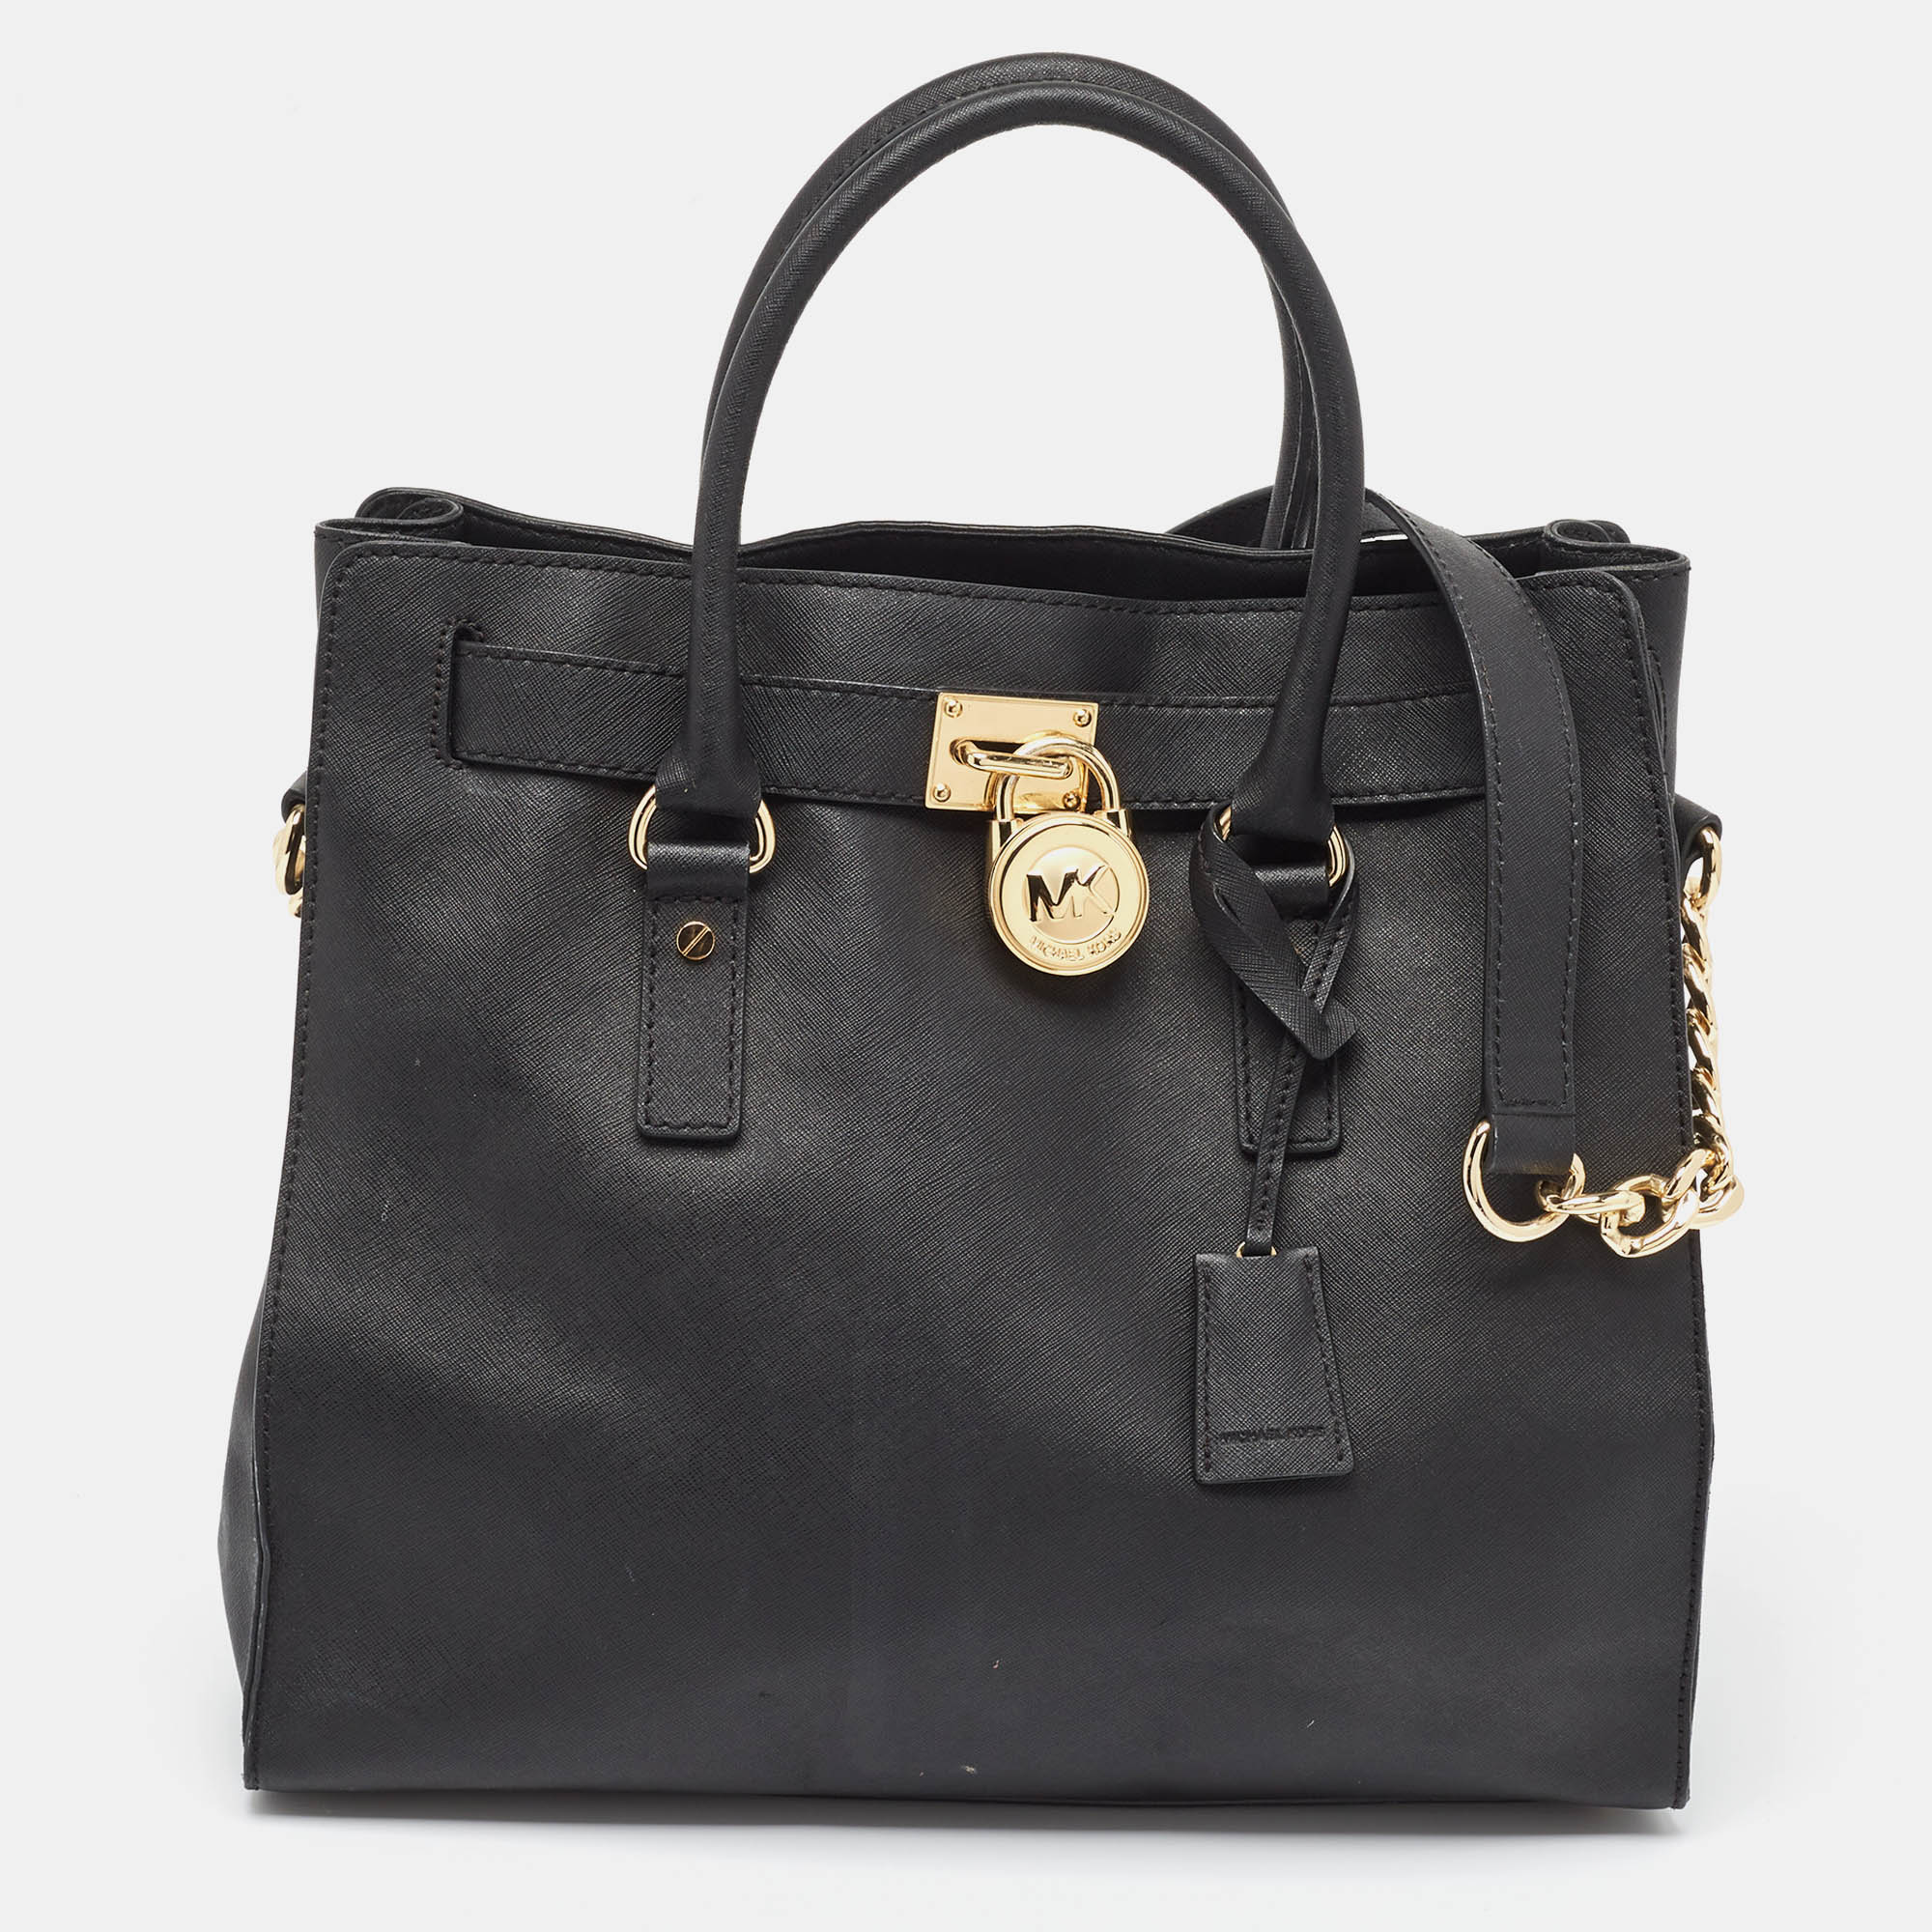 Pre-owned Michael Kors Black Leather Hamilton North South Tote